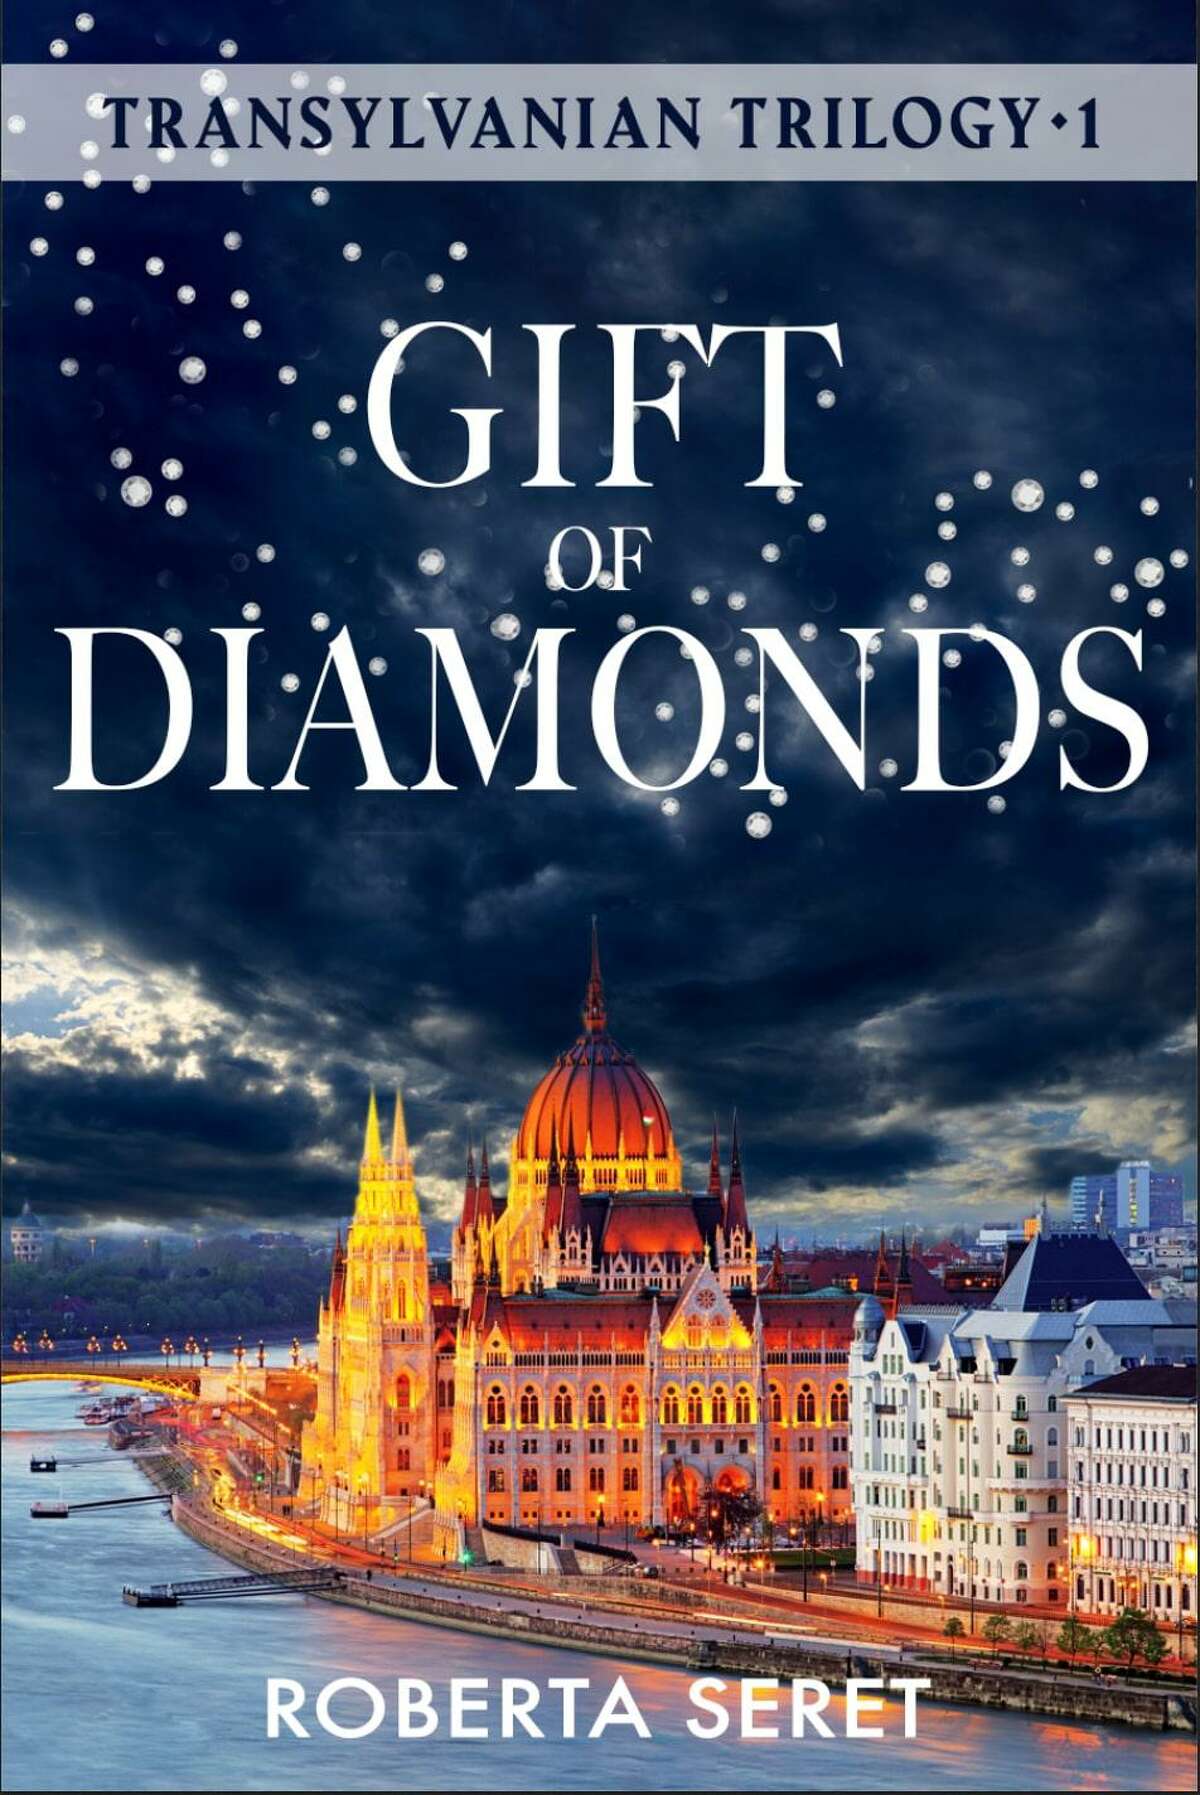 Roberta Seret, an author from Westport, has penned a new historical fiction novel, "Gift of Diamonds" about a 1990 revolution in Bucharest, Romania. The book is the first in the Transylvania Trilogy."